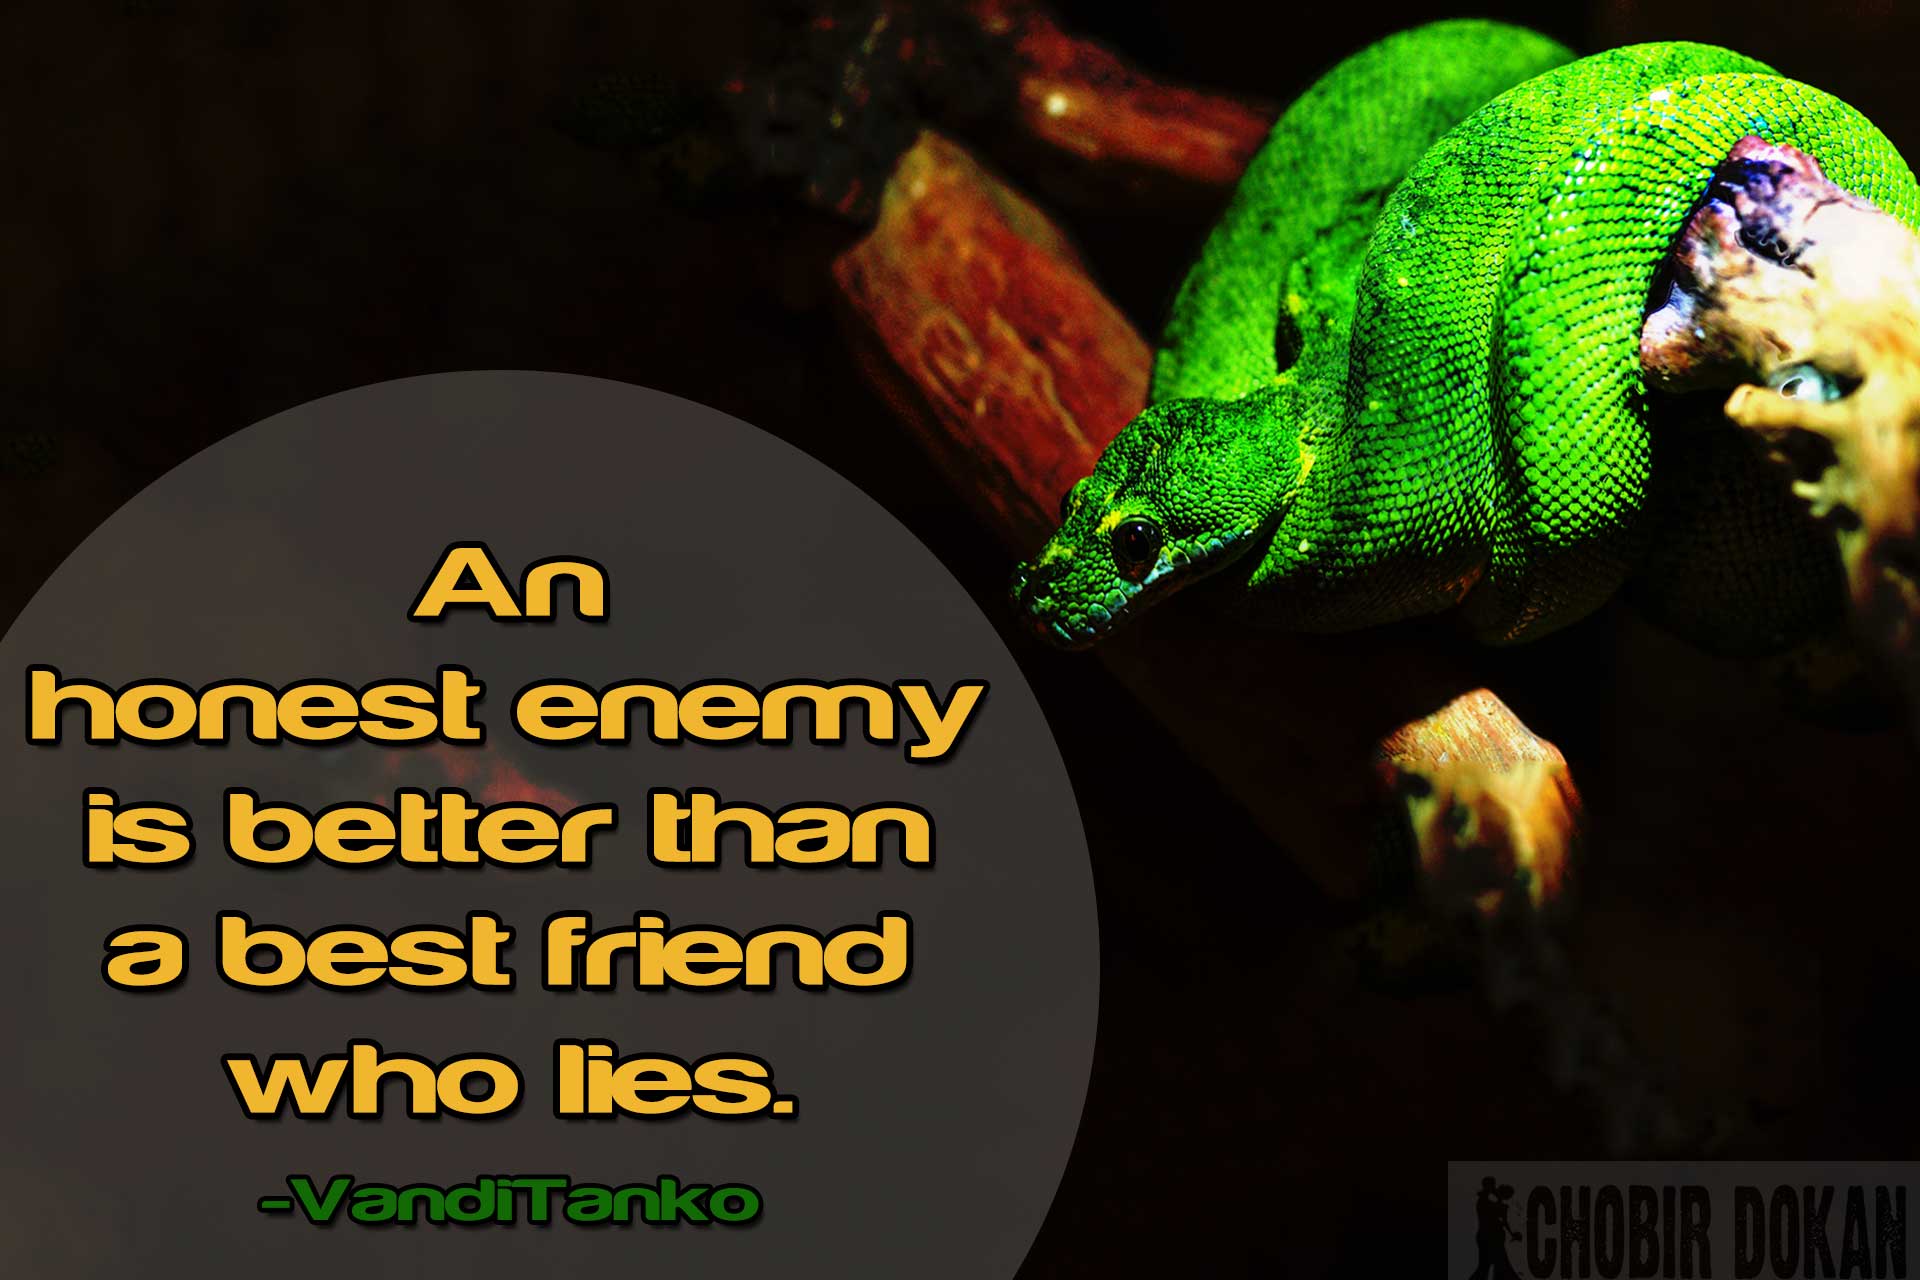 28+ Fake Friends Quotes Image for Facebook